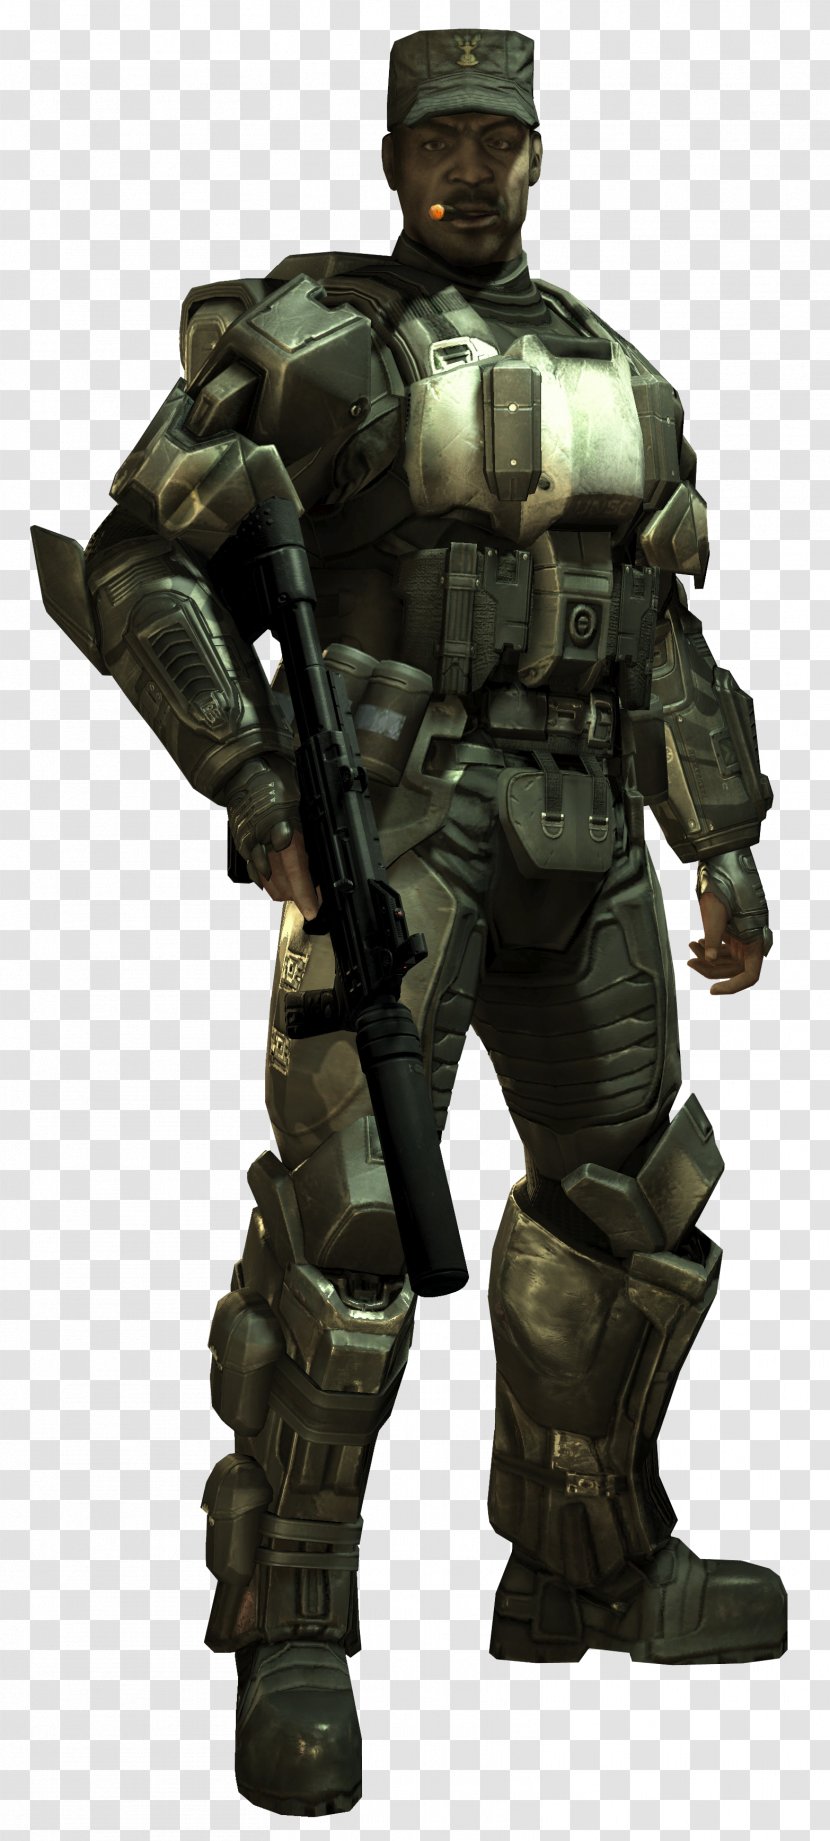 Halo 3: ODST Halo: Reach Xbox 360 2 - Video Game Transparent PNG